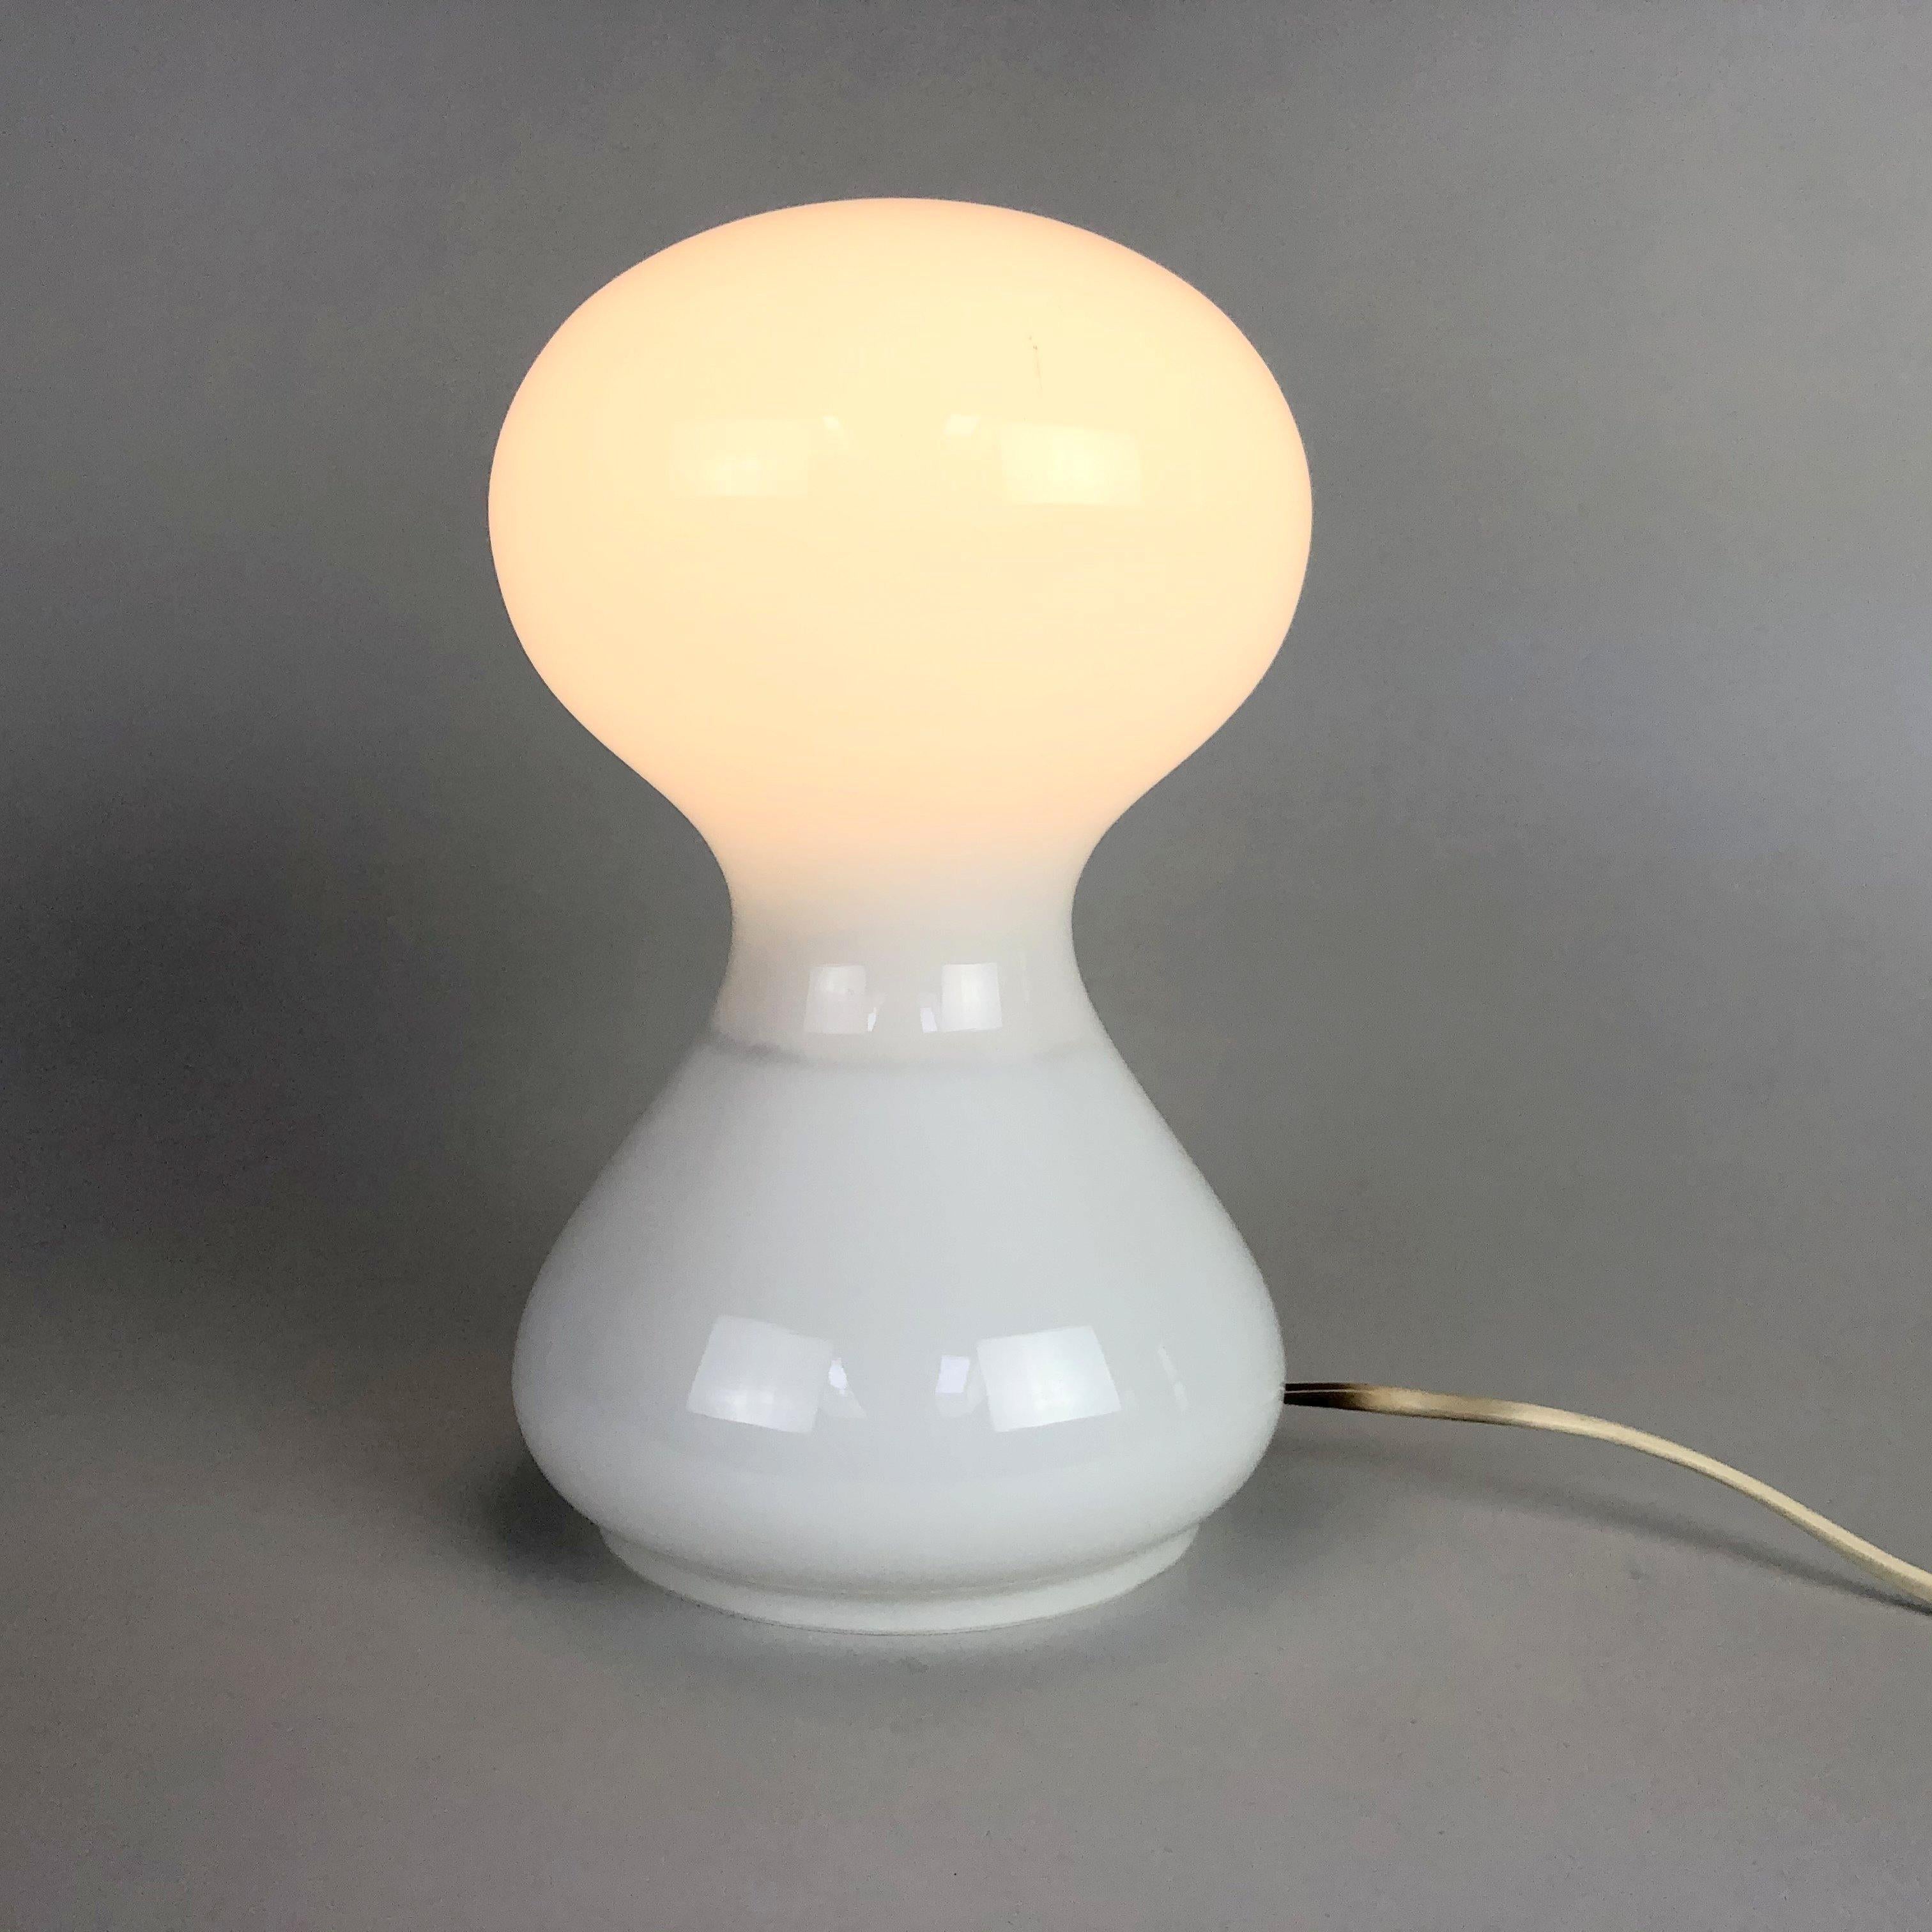 Mid-century table lamp designed by Ivan Jakes and produced by Osvetlovaci n.p. Valasske Mezirici in Czechoslovakia in 1970's. Original, fully functional wiring.